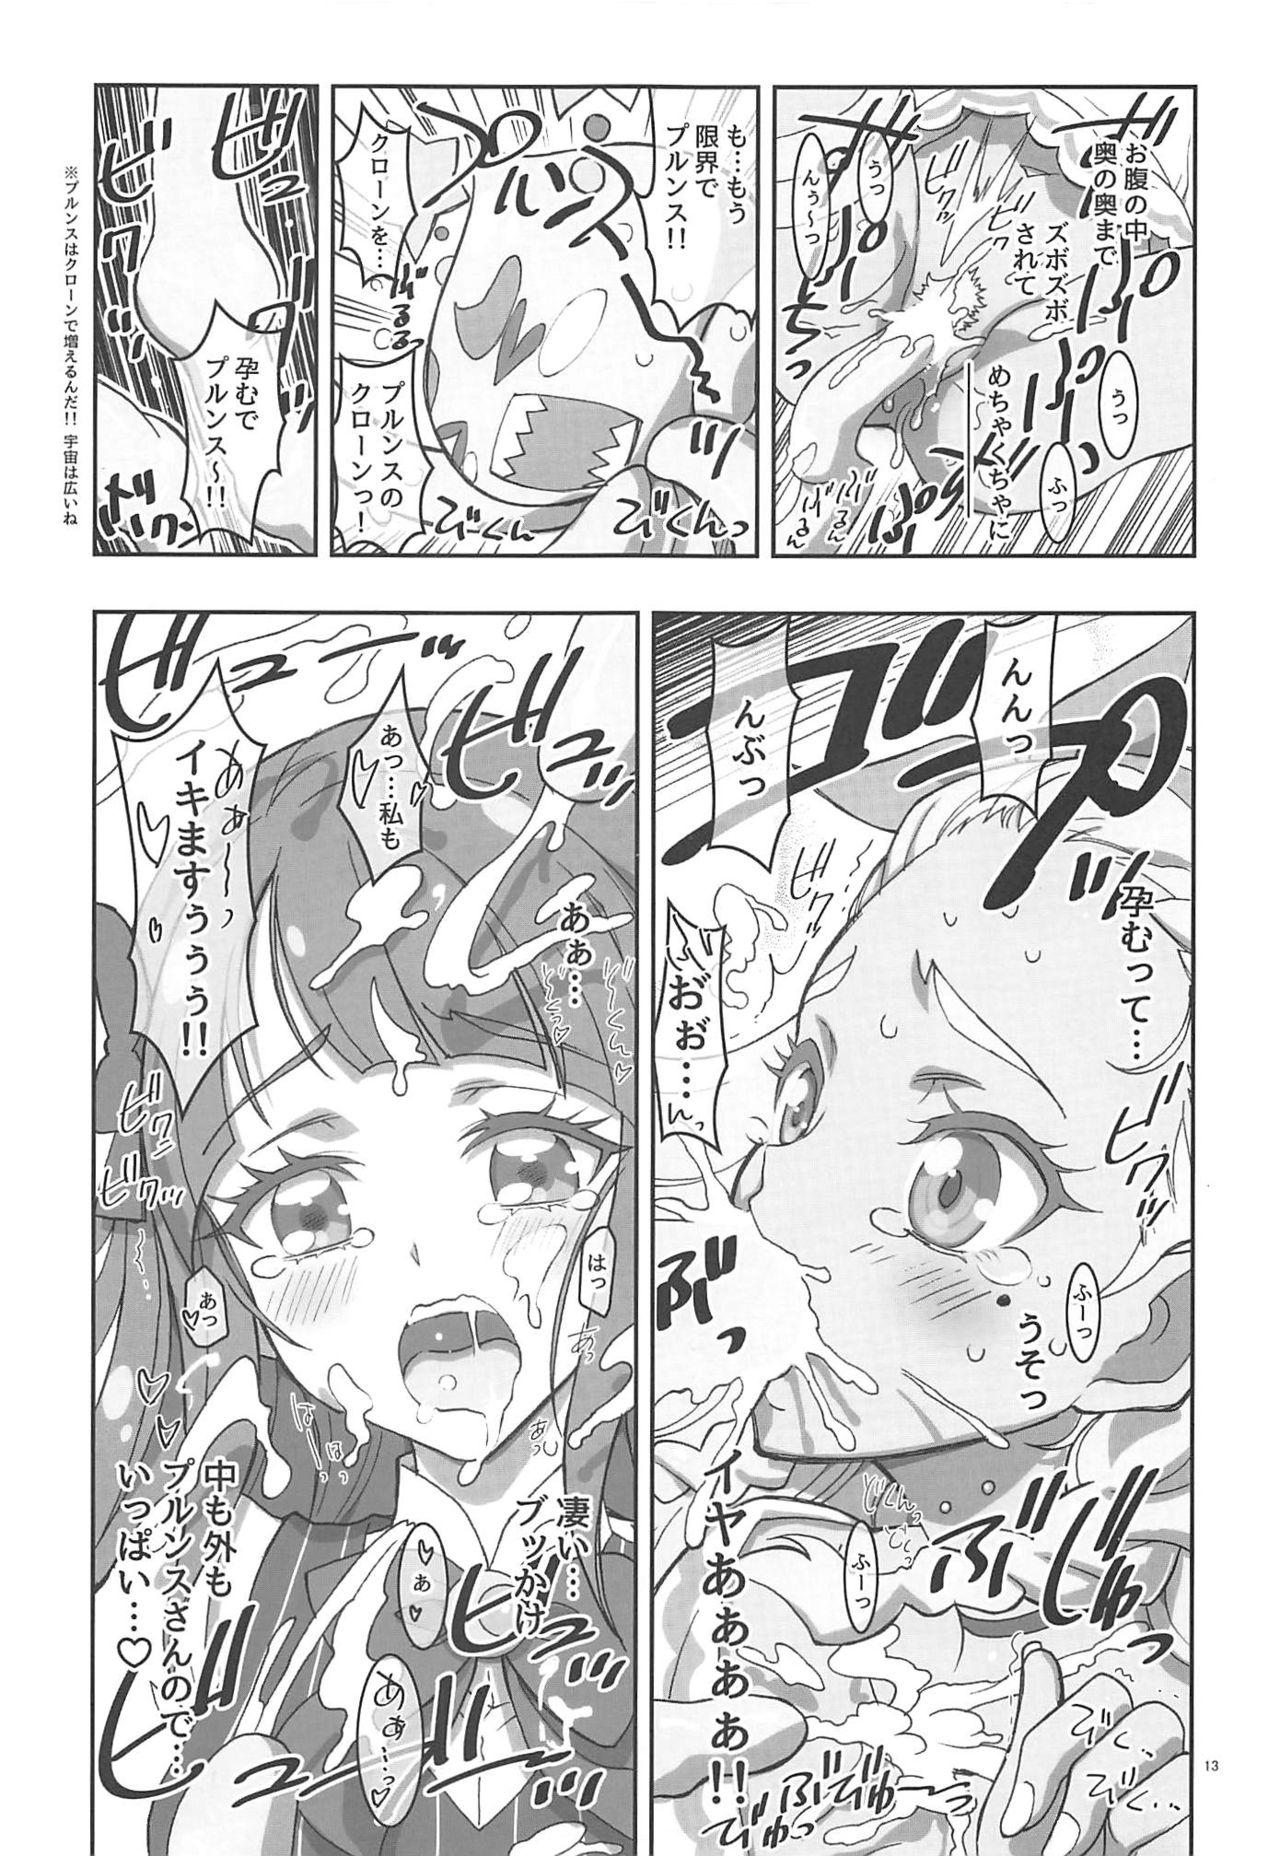 Old Vs Young SPACE RUN AWEY - Star twinkle precure Puto - Page 12